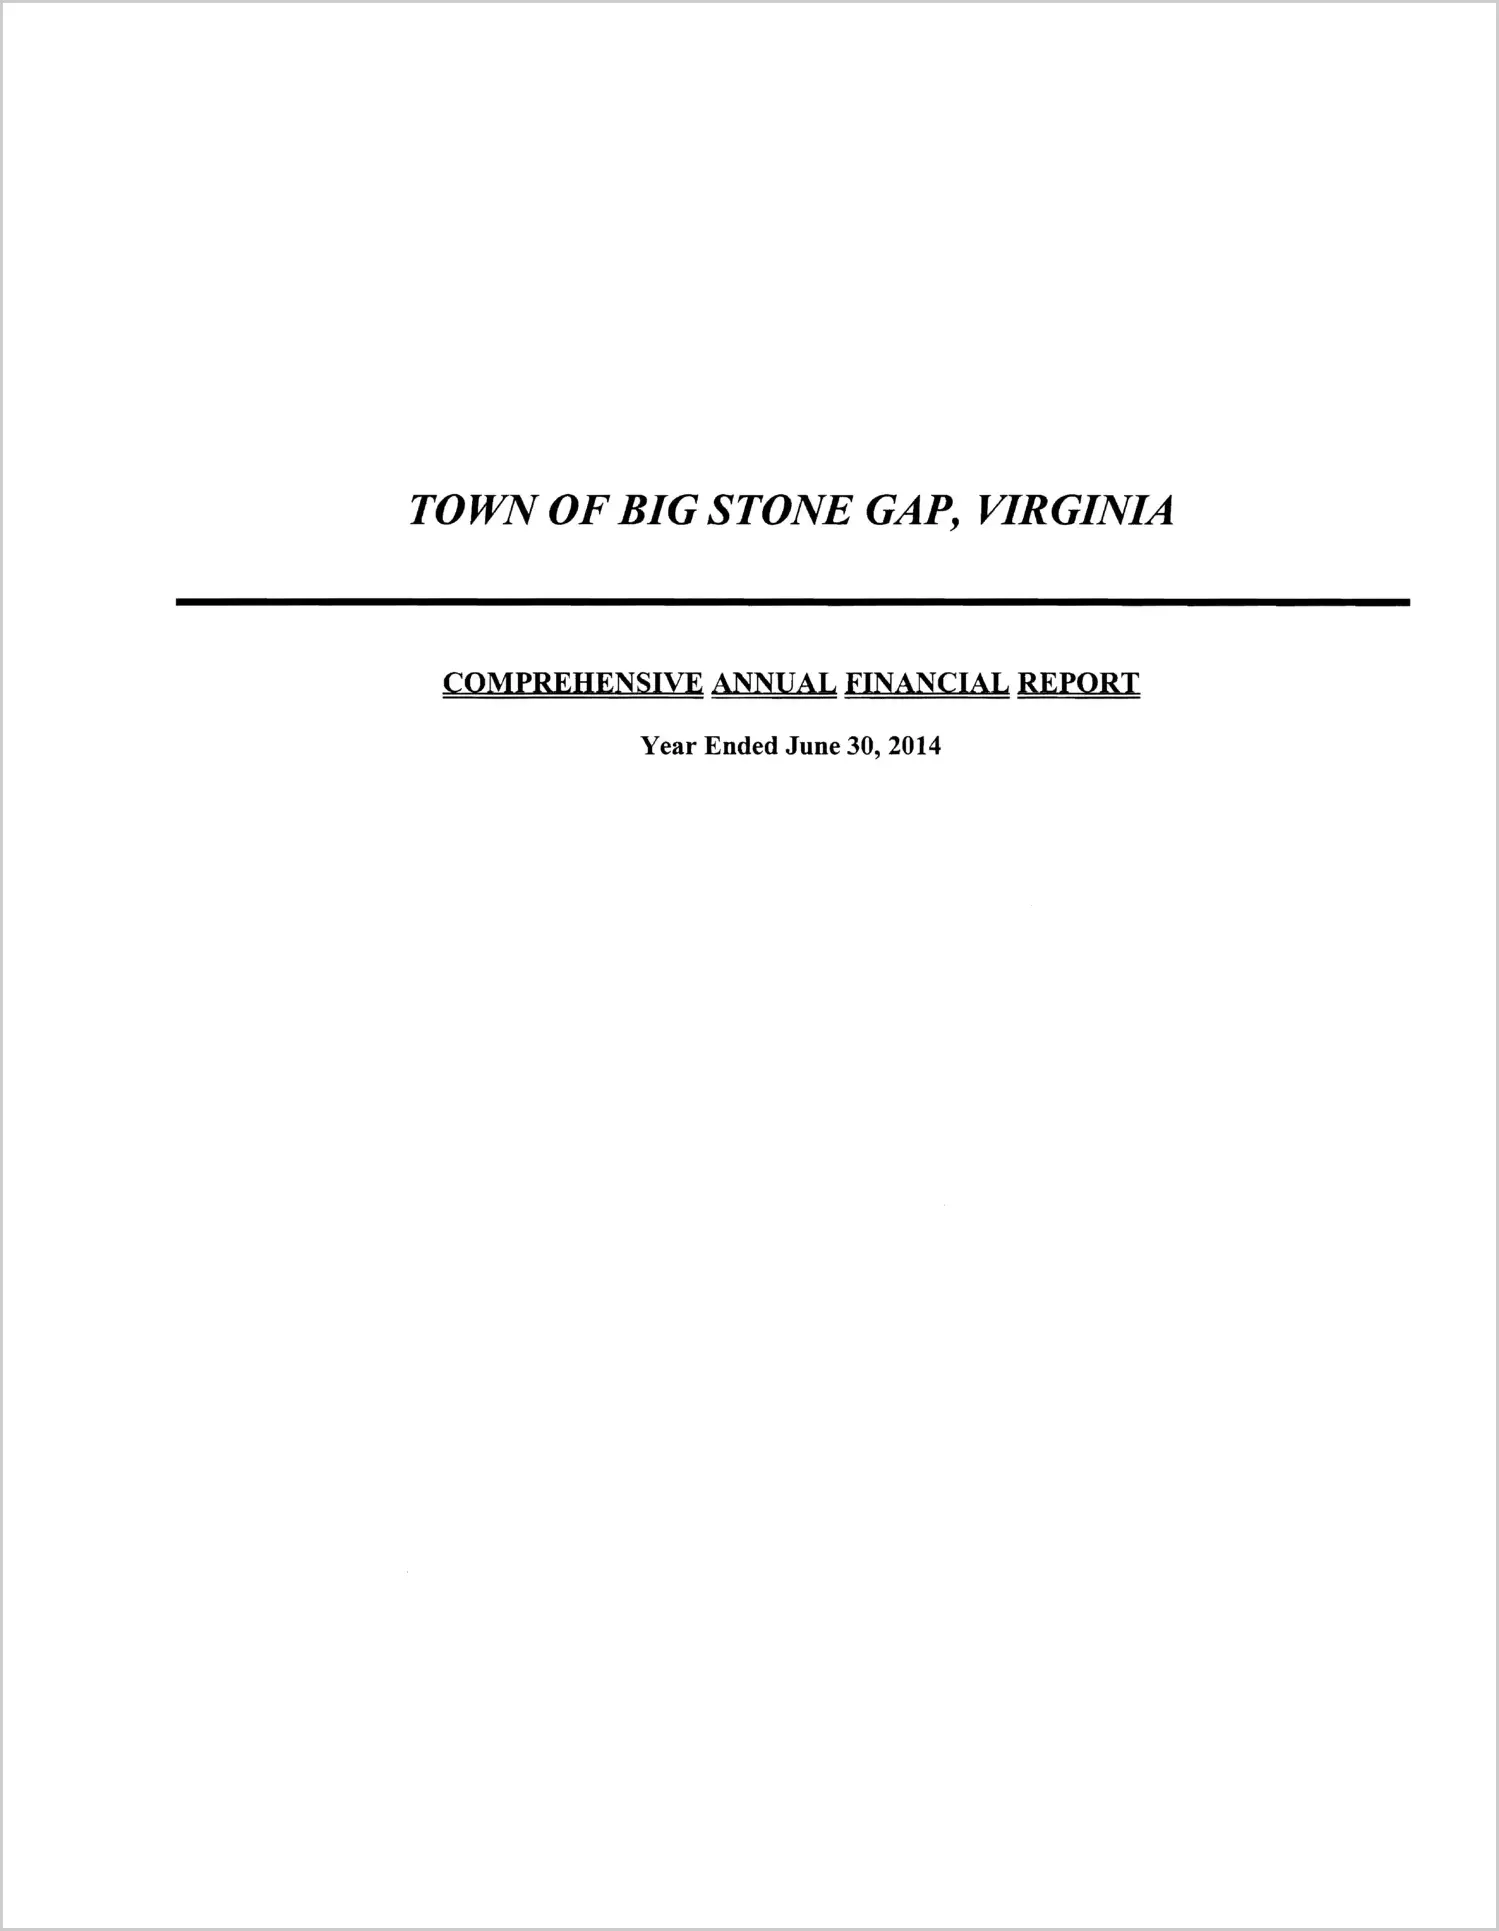 2014 Annual Financial Report for Town of Big Stone Gap